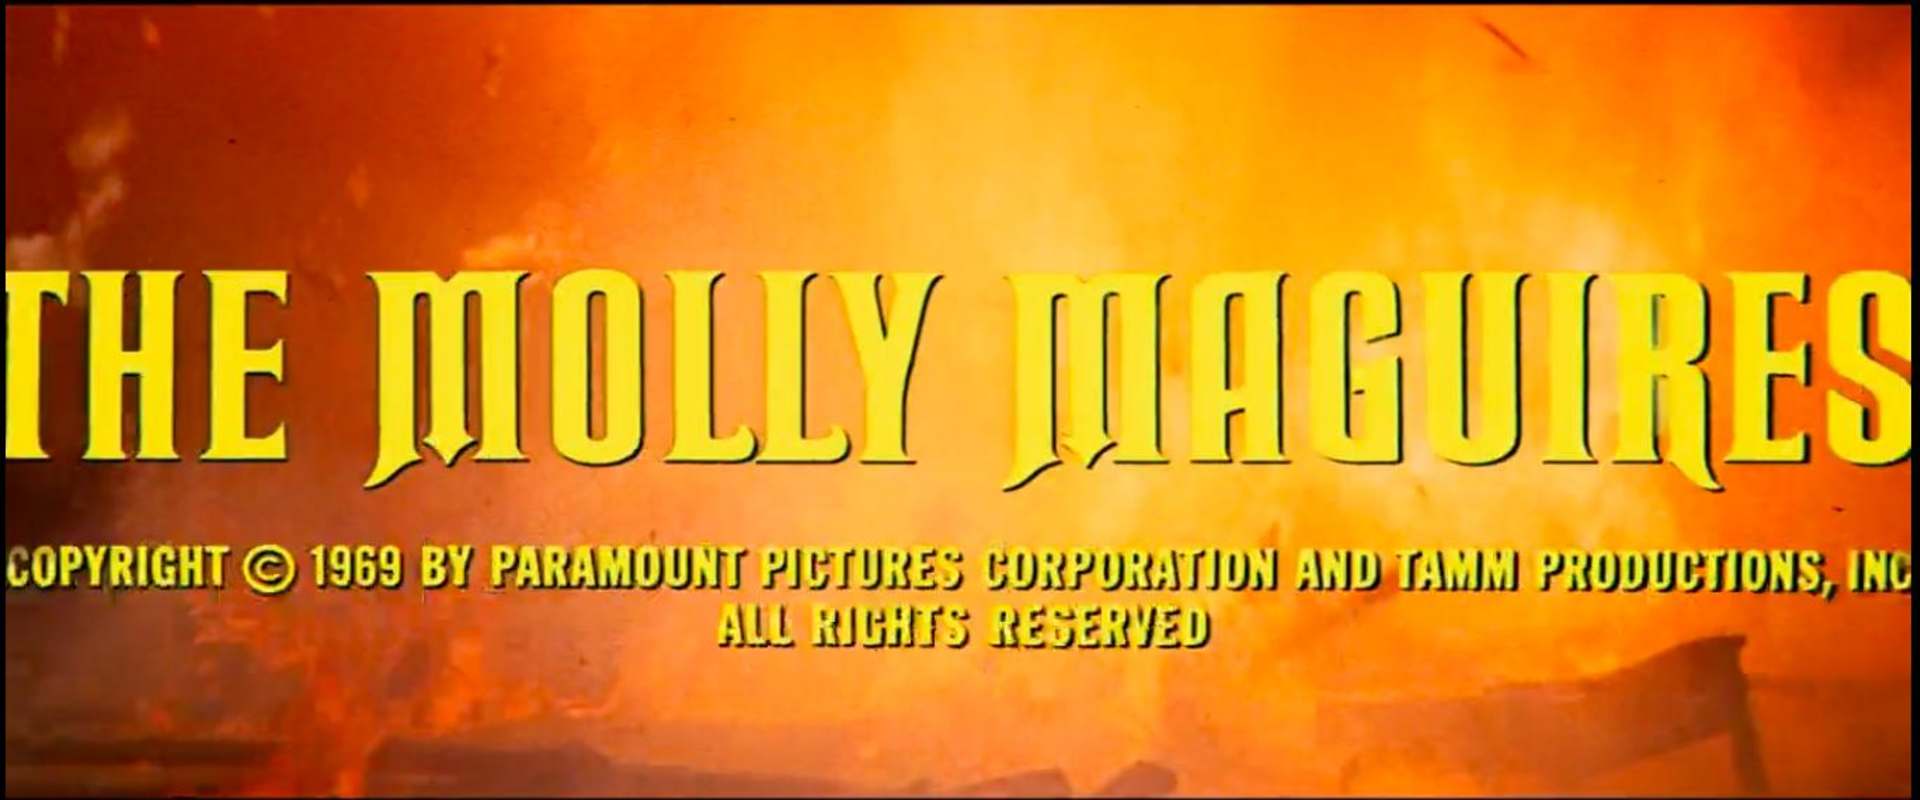 The Molly Maguires background 1